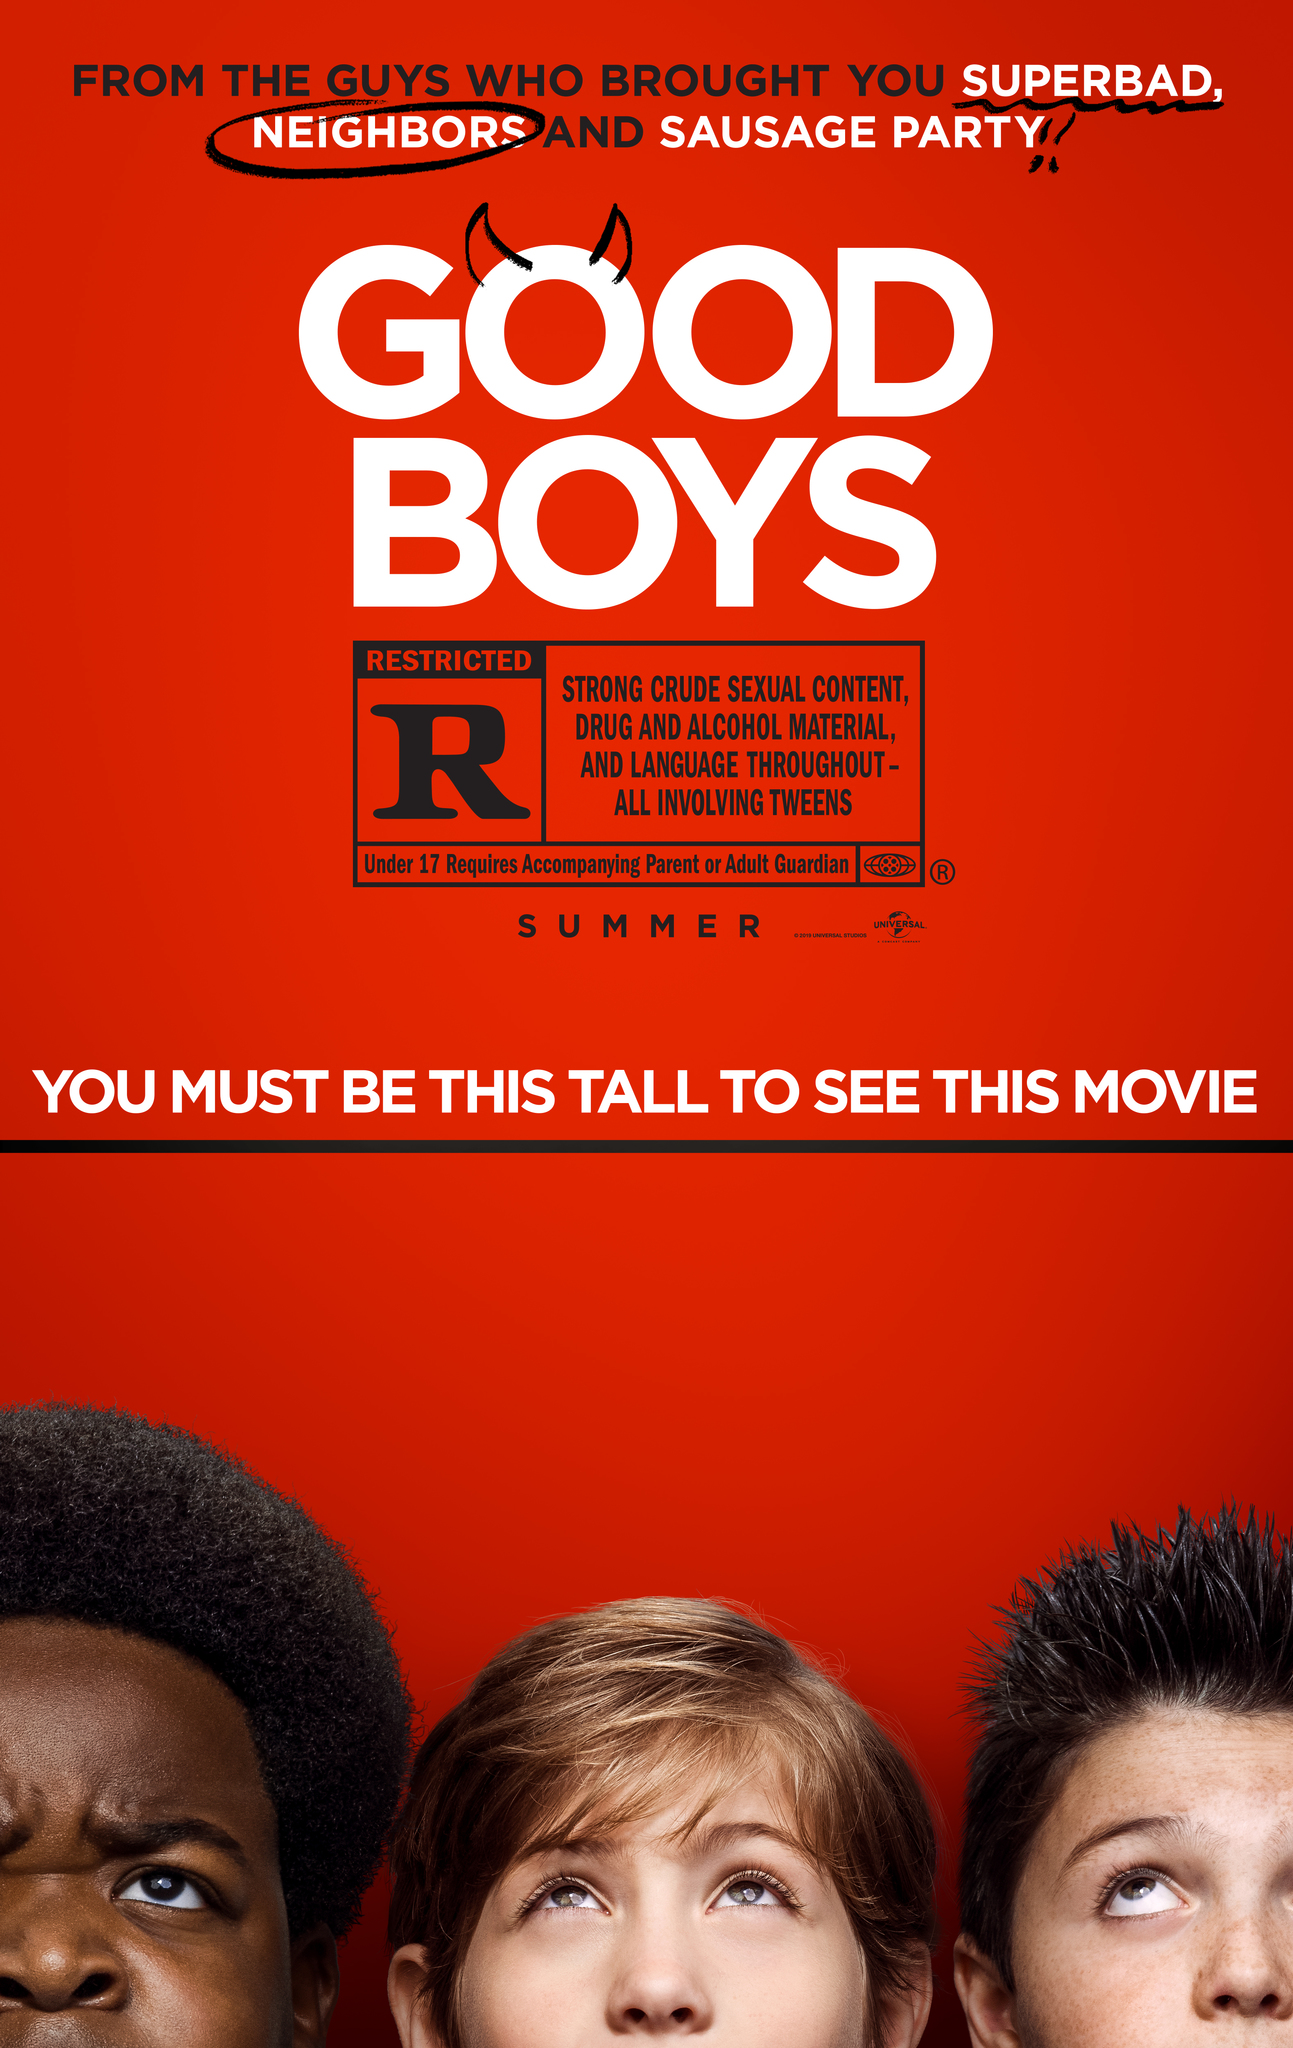 Not so bad: sync deal success for Point Classics with track placed in new film ‘Good Boys’